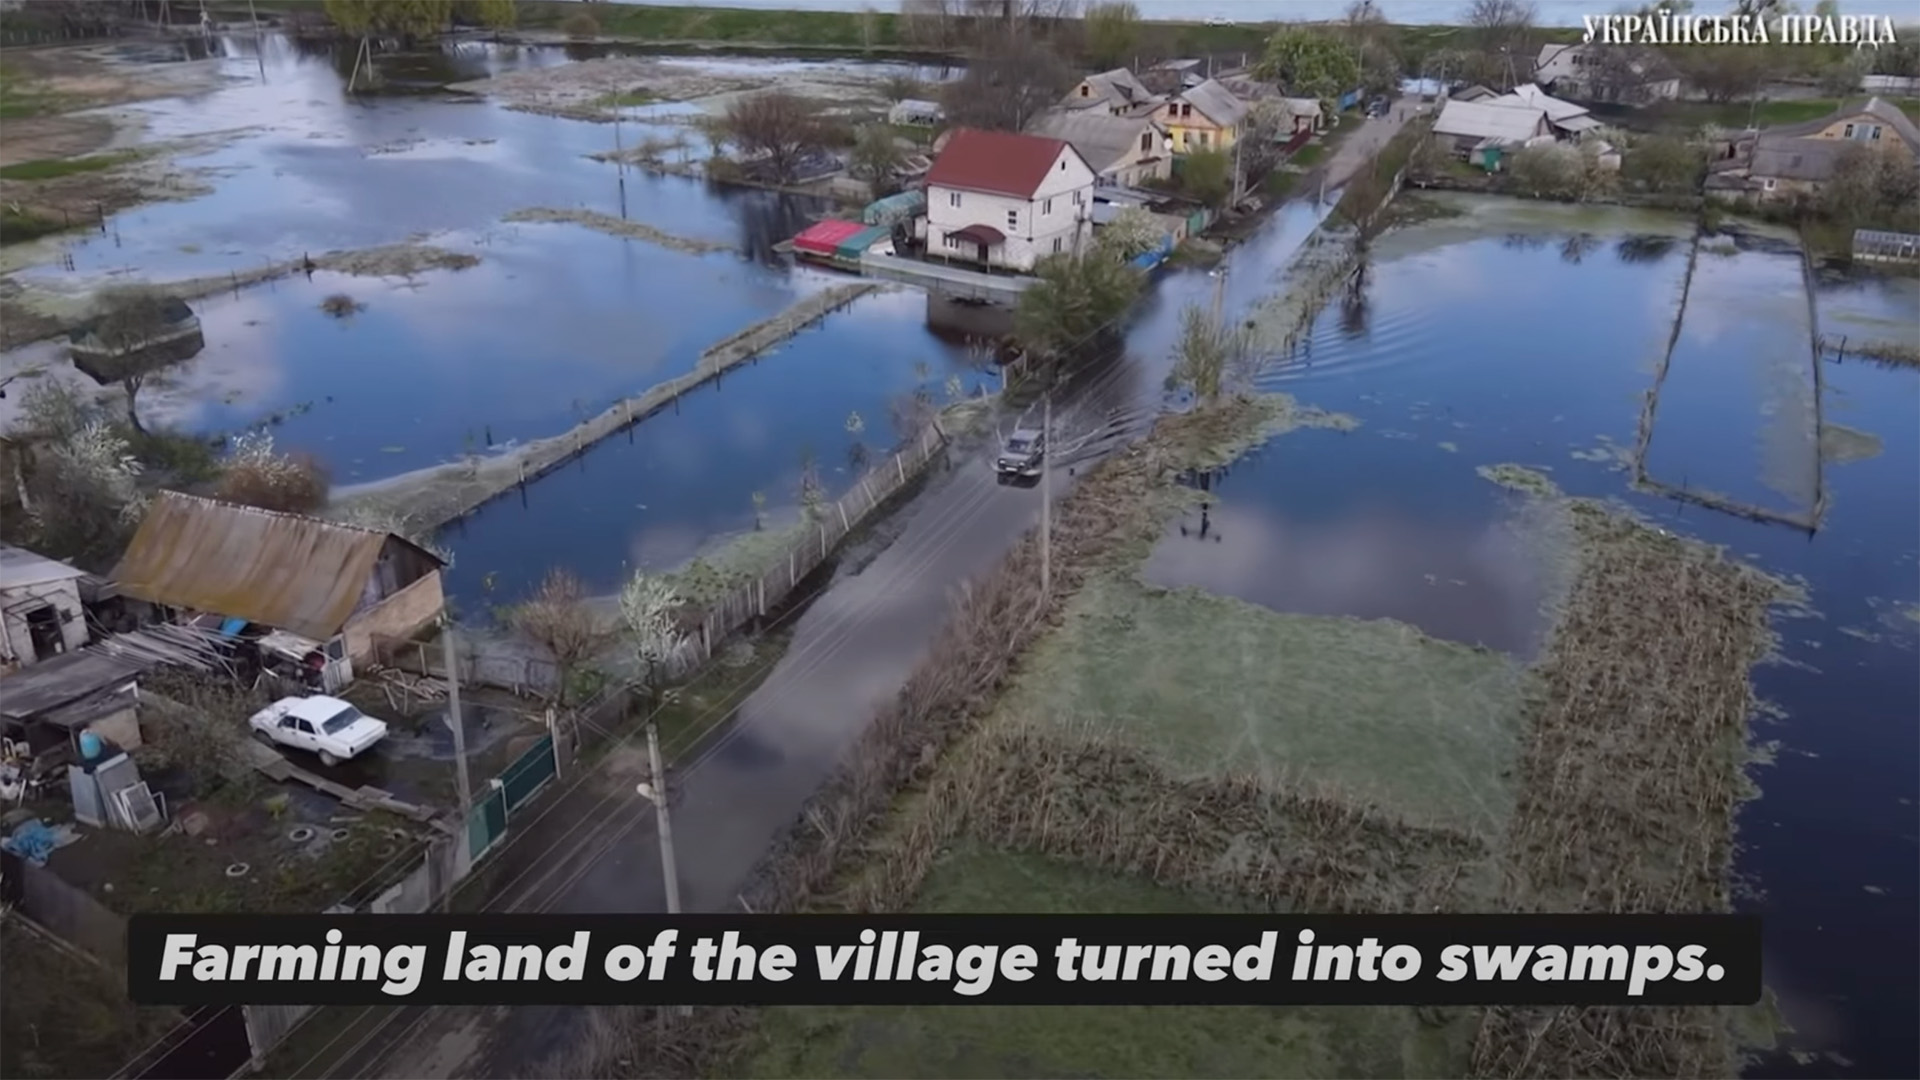 Volunteers deliver 2,500 lbs of dry food to the flooded village of Demydev, Ukraine.